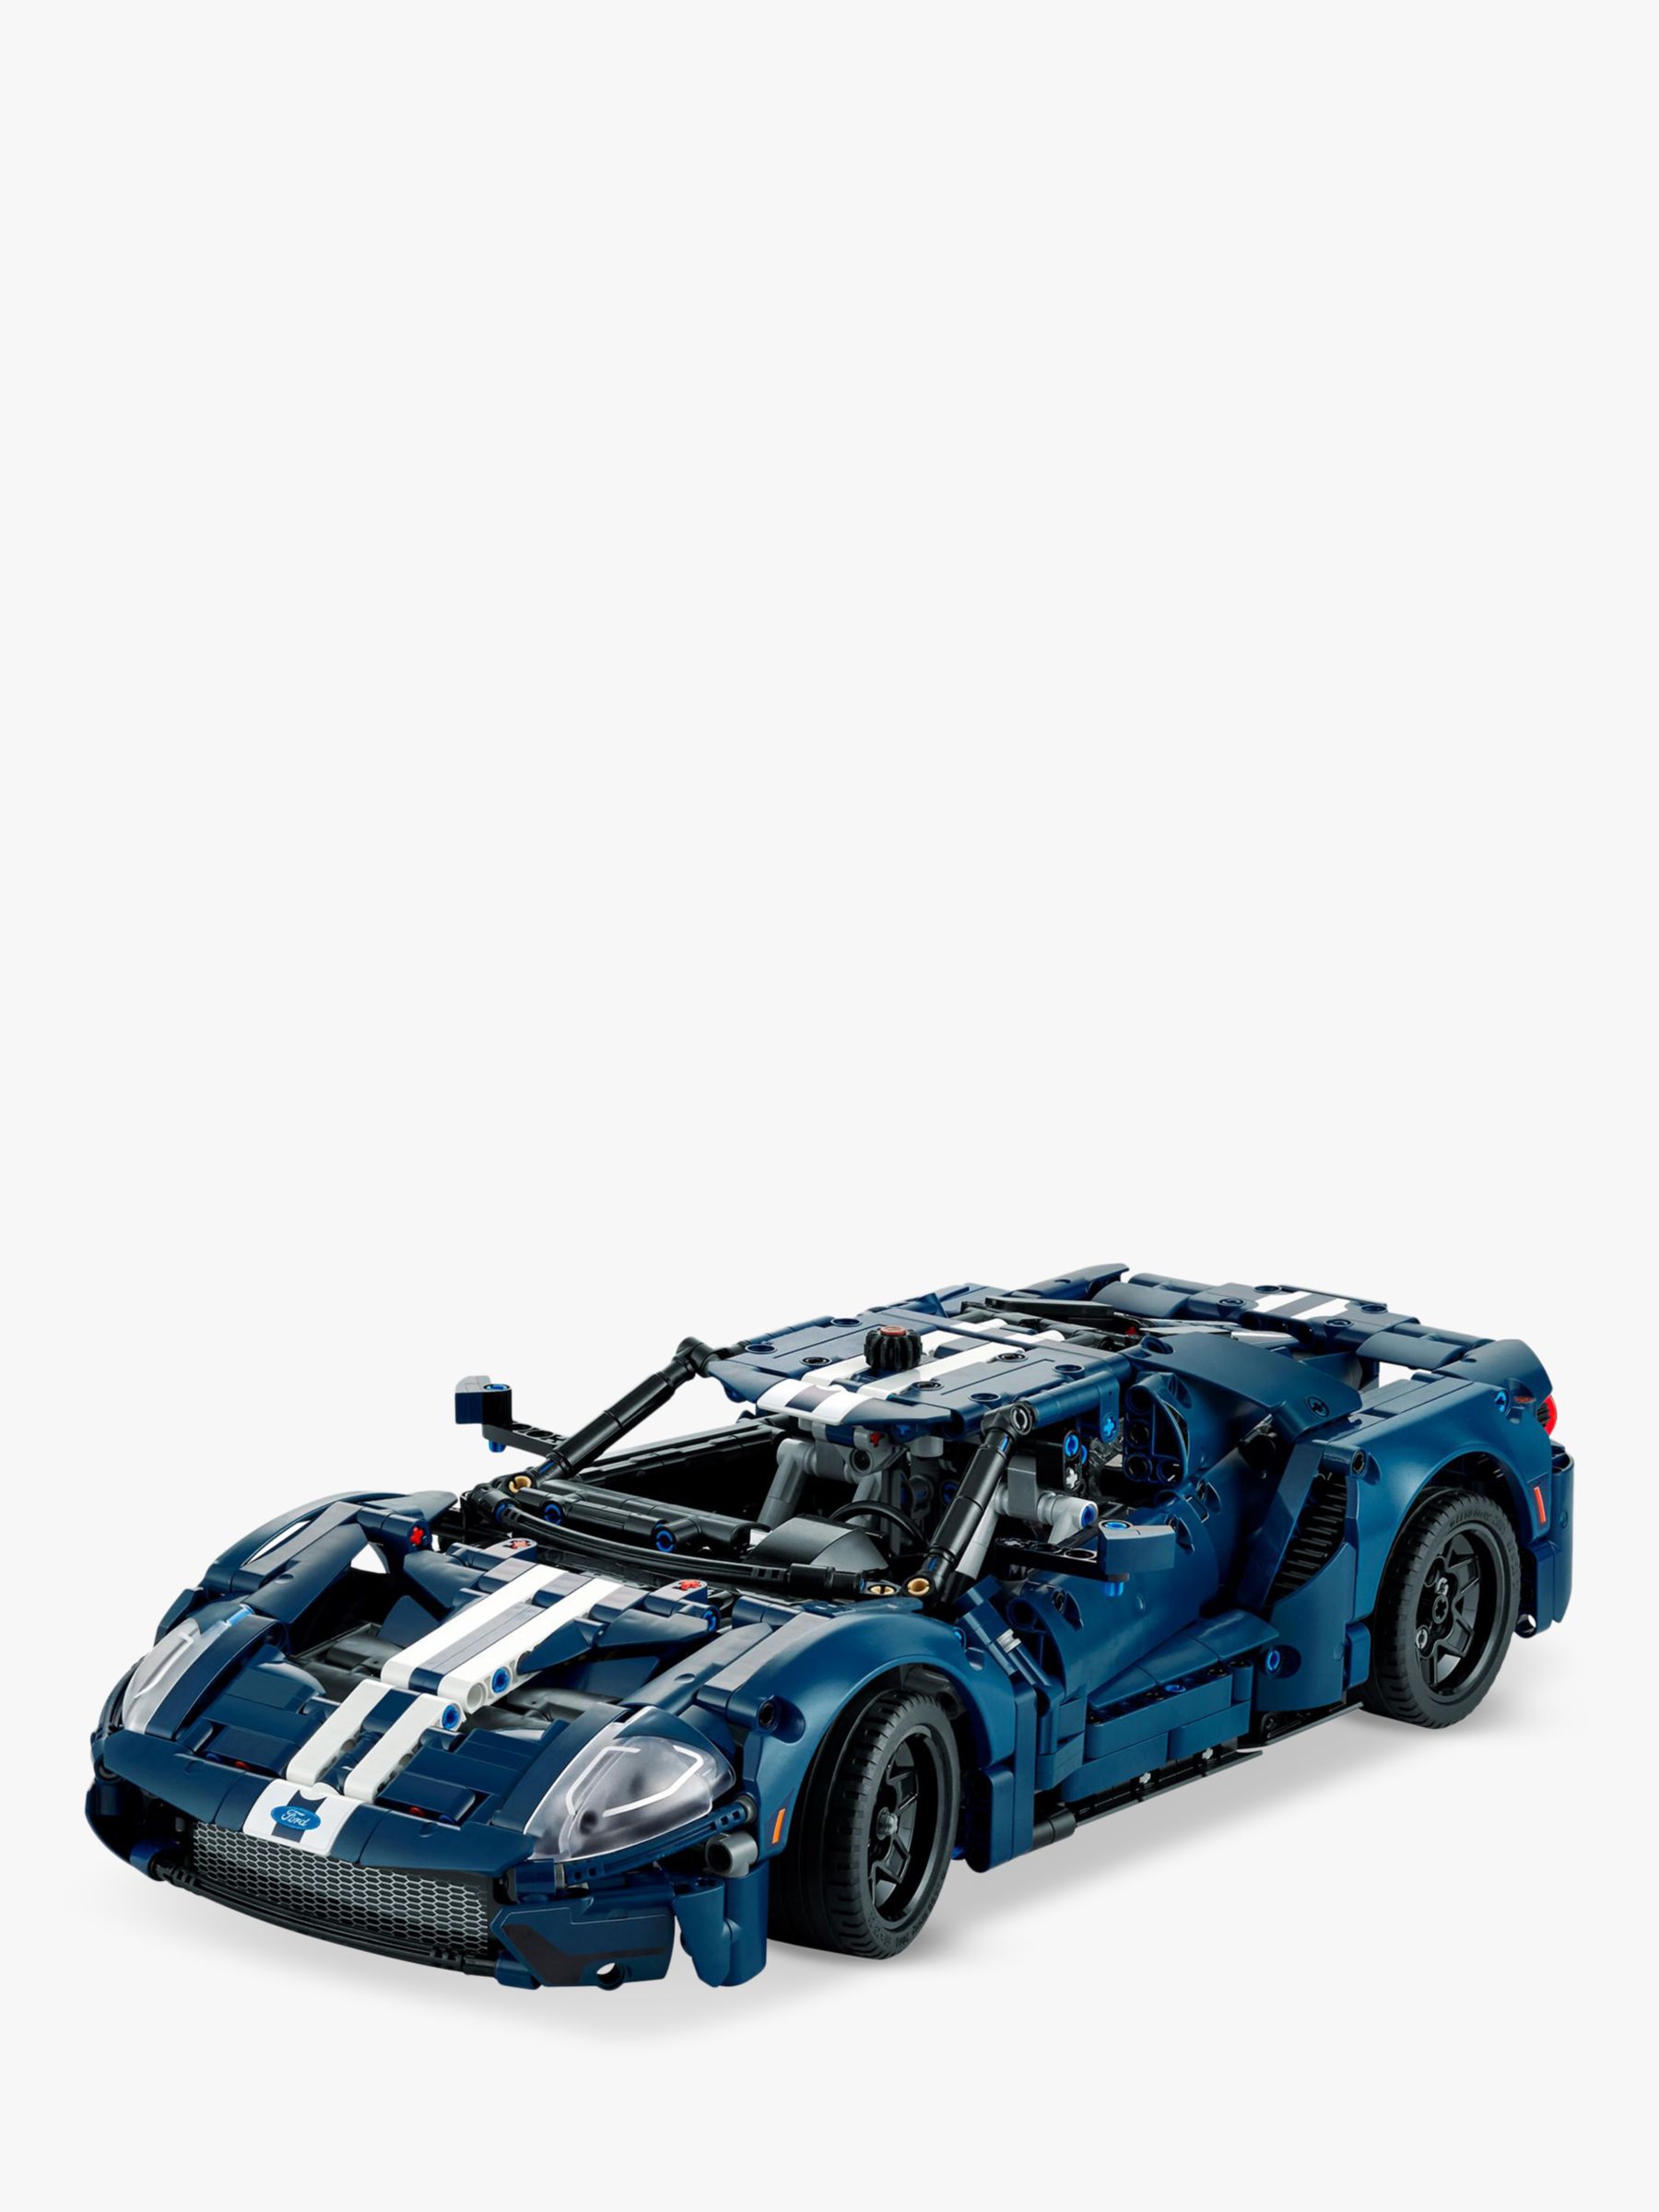 2022 Ford GT Lego Technic Launches Later This Year